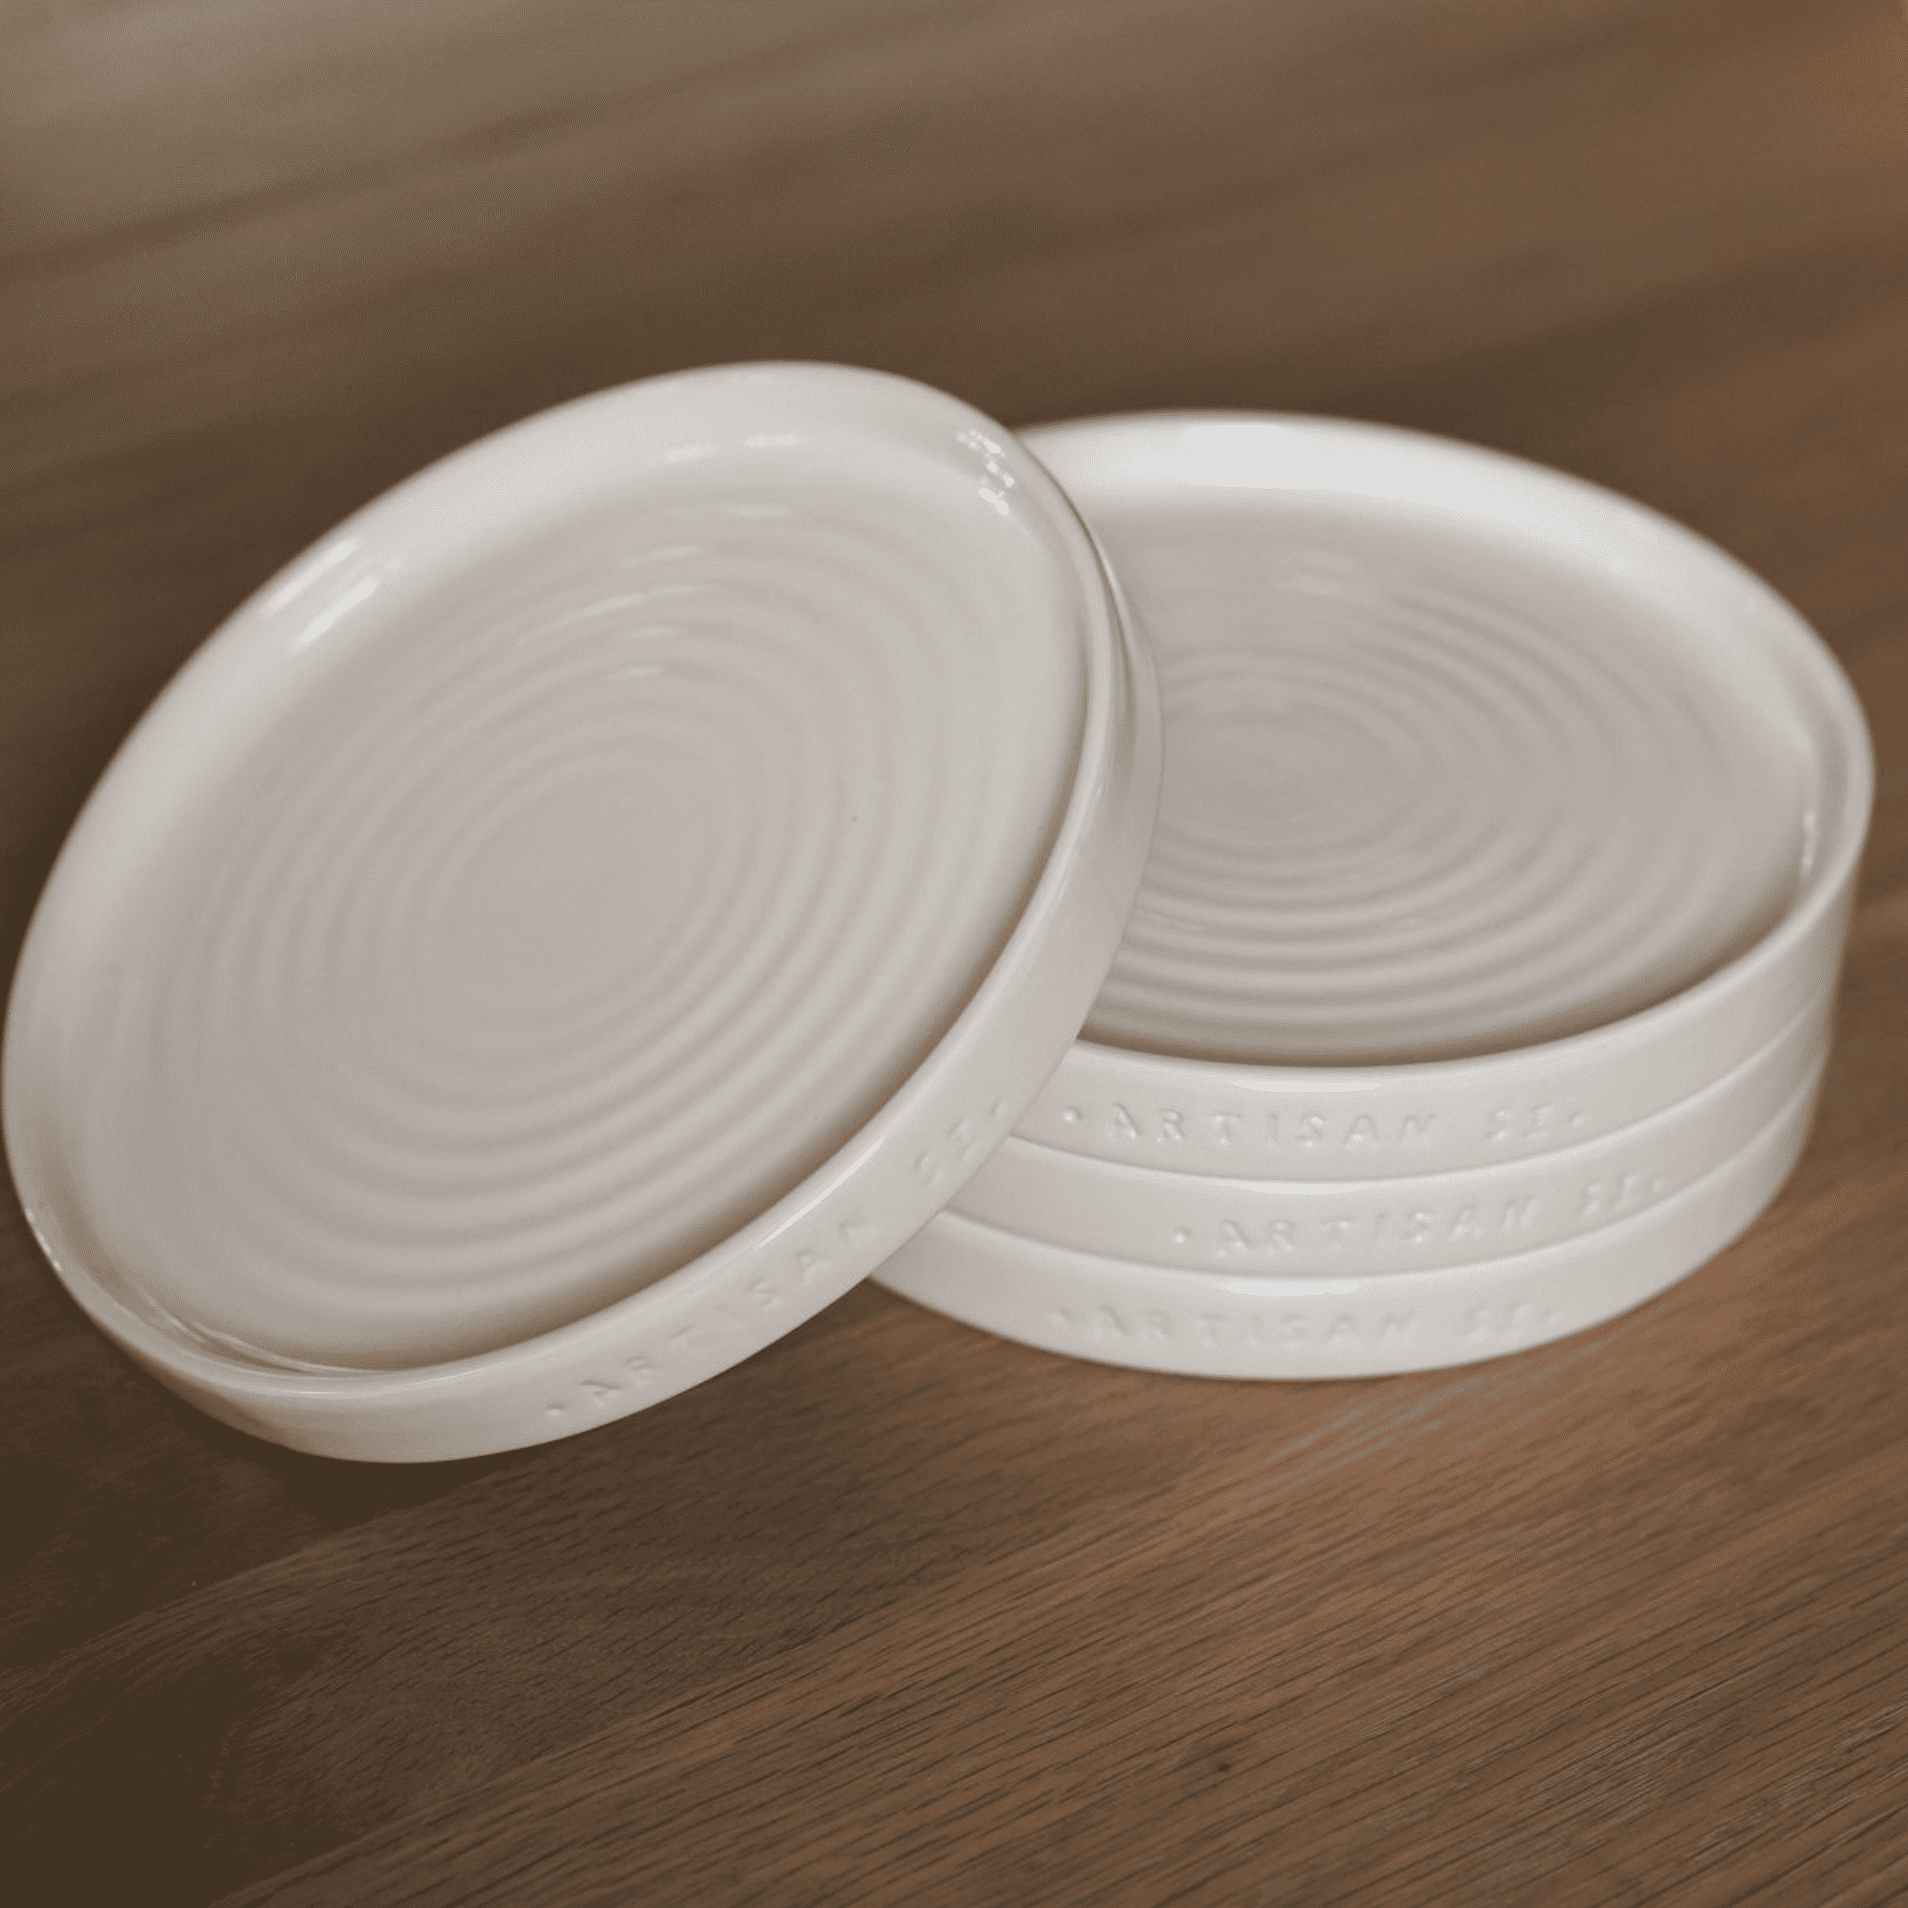 Set of four cream side plates on wooden table